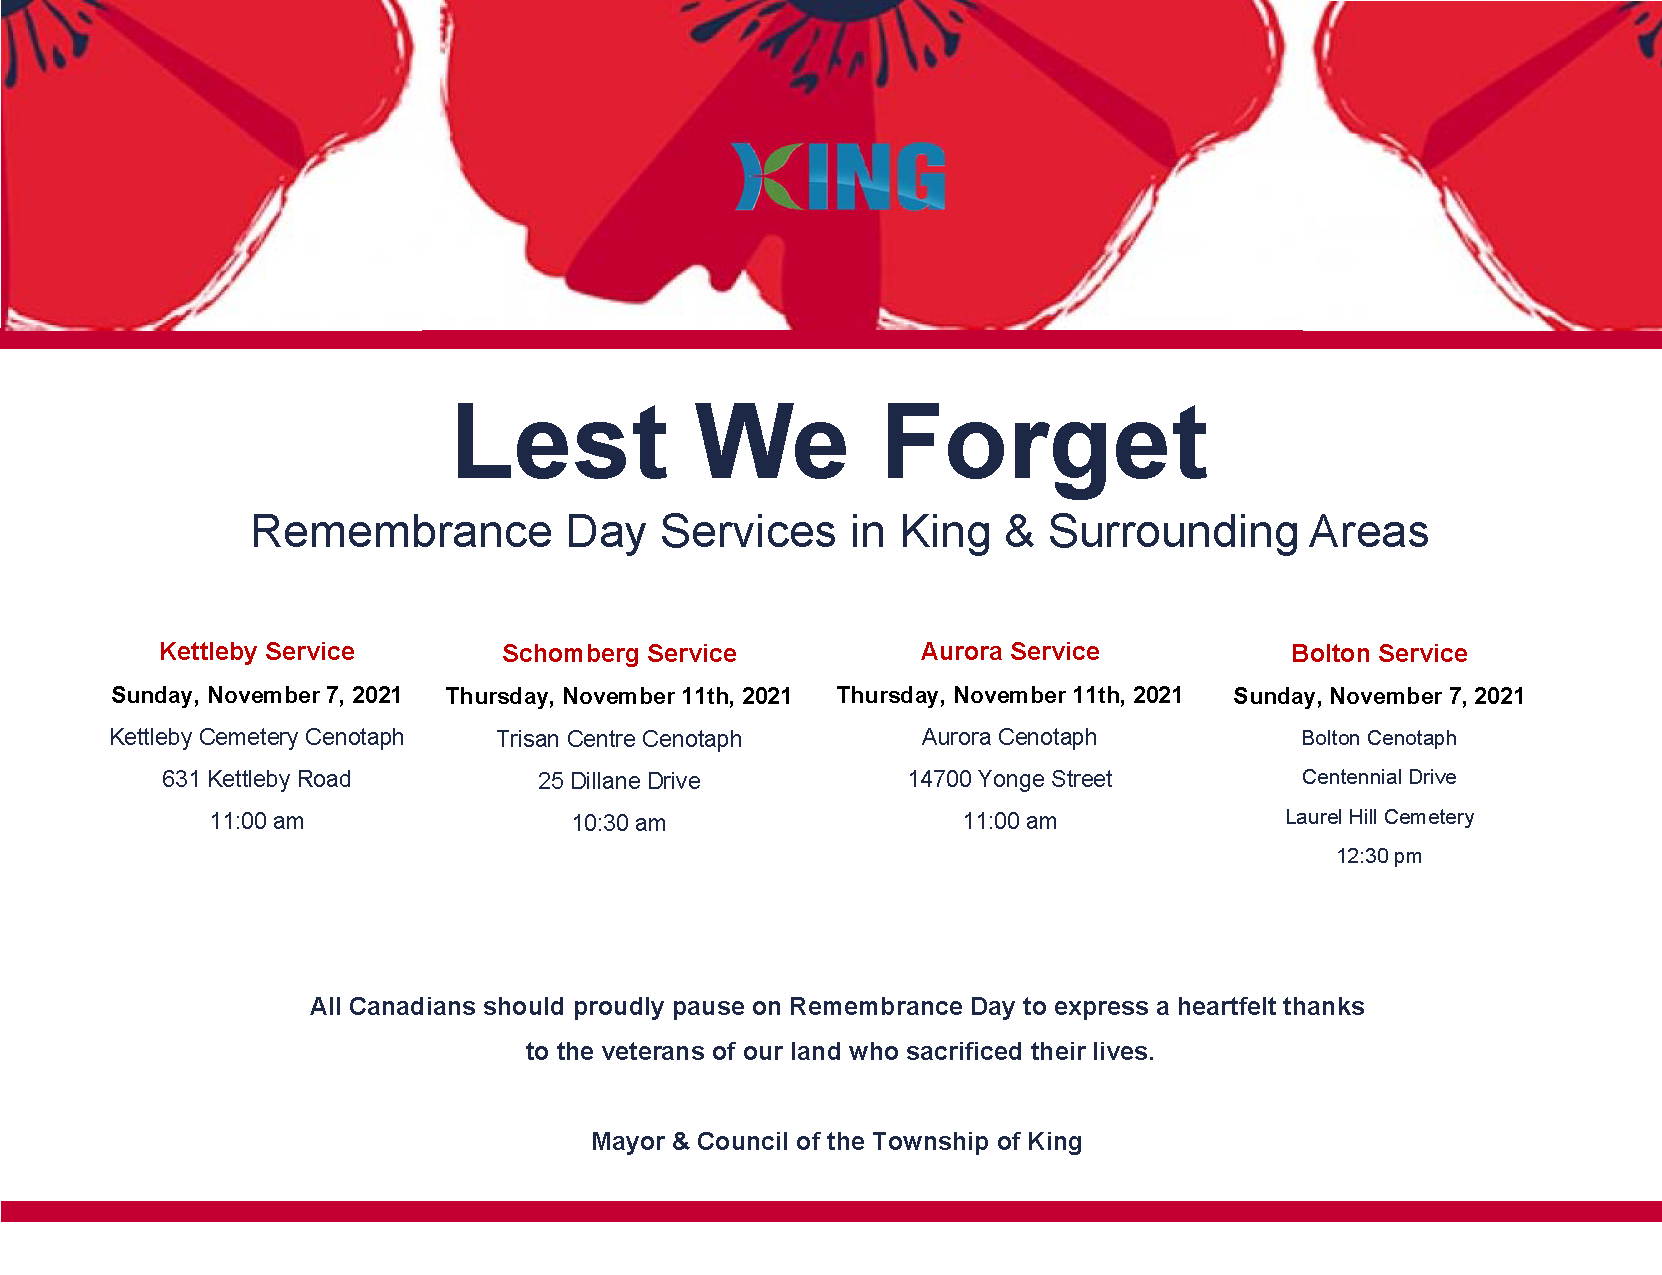 Remembrance Day ceremonies